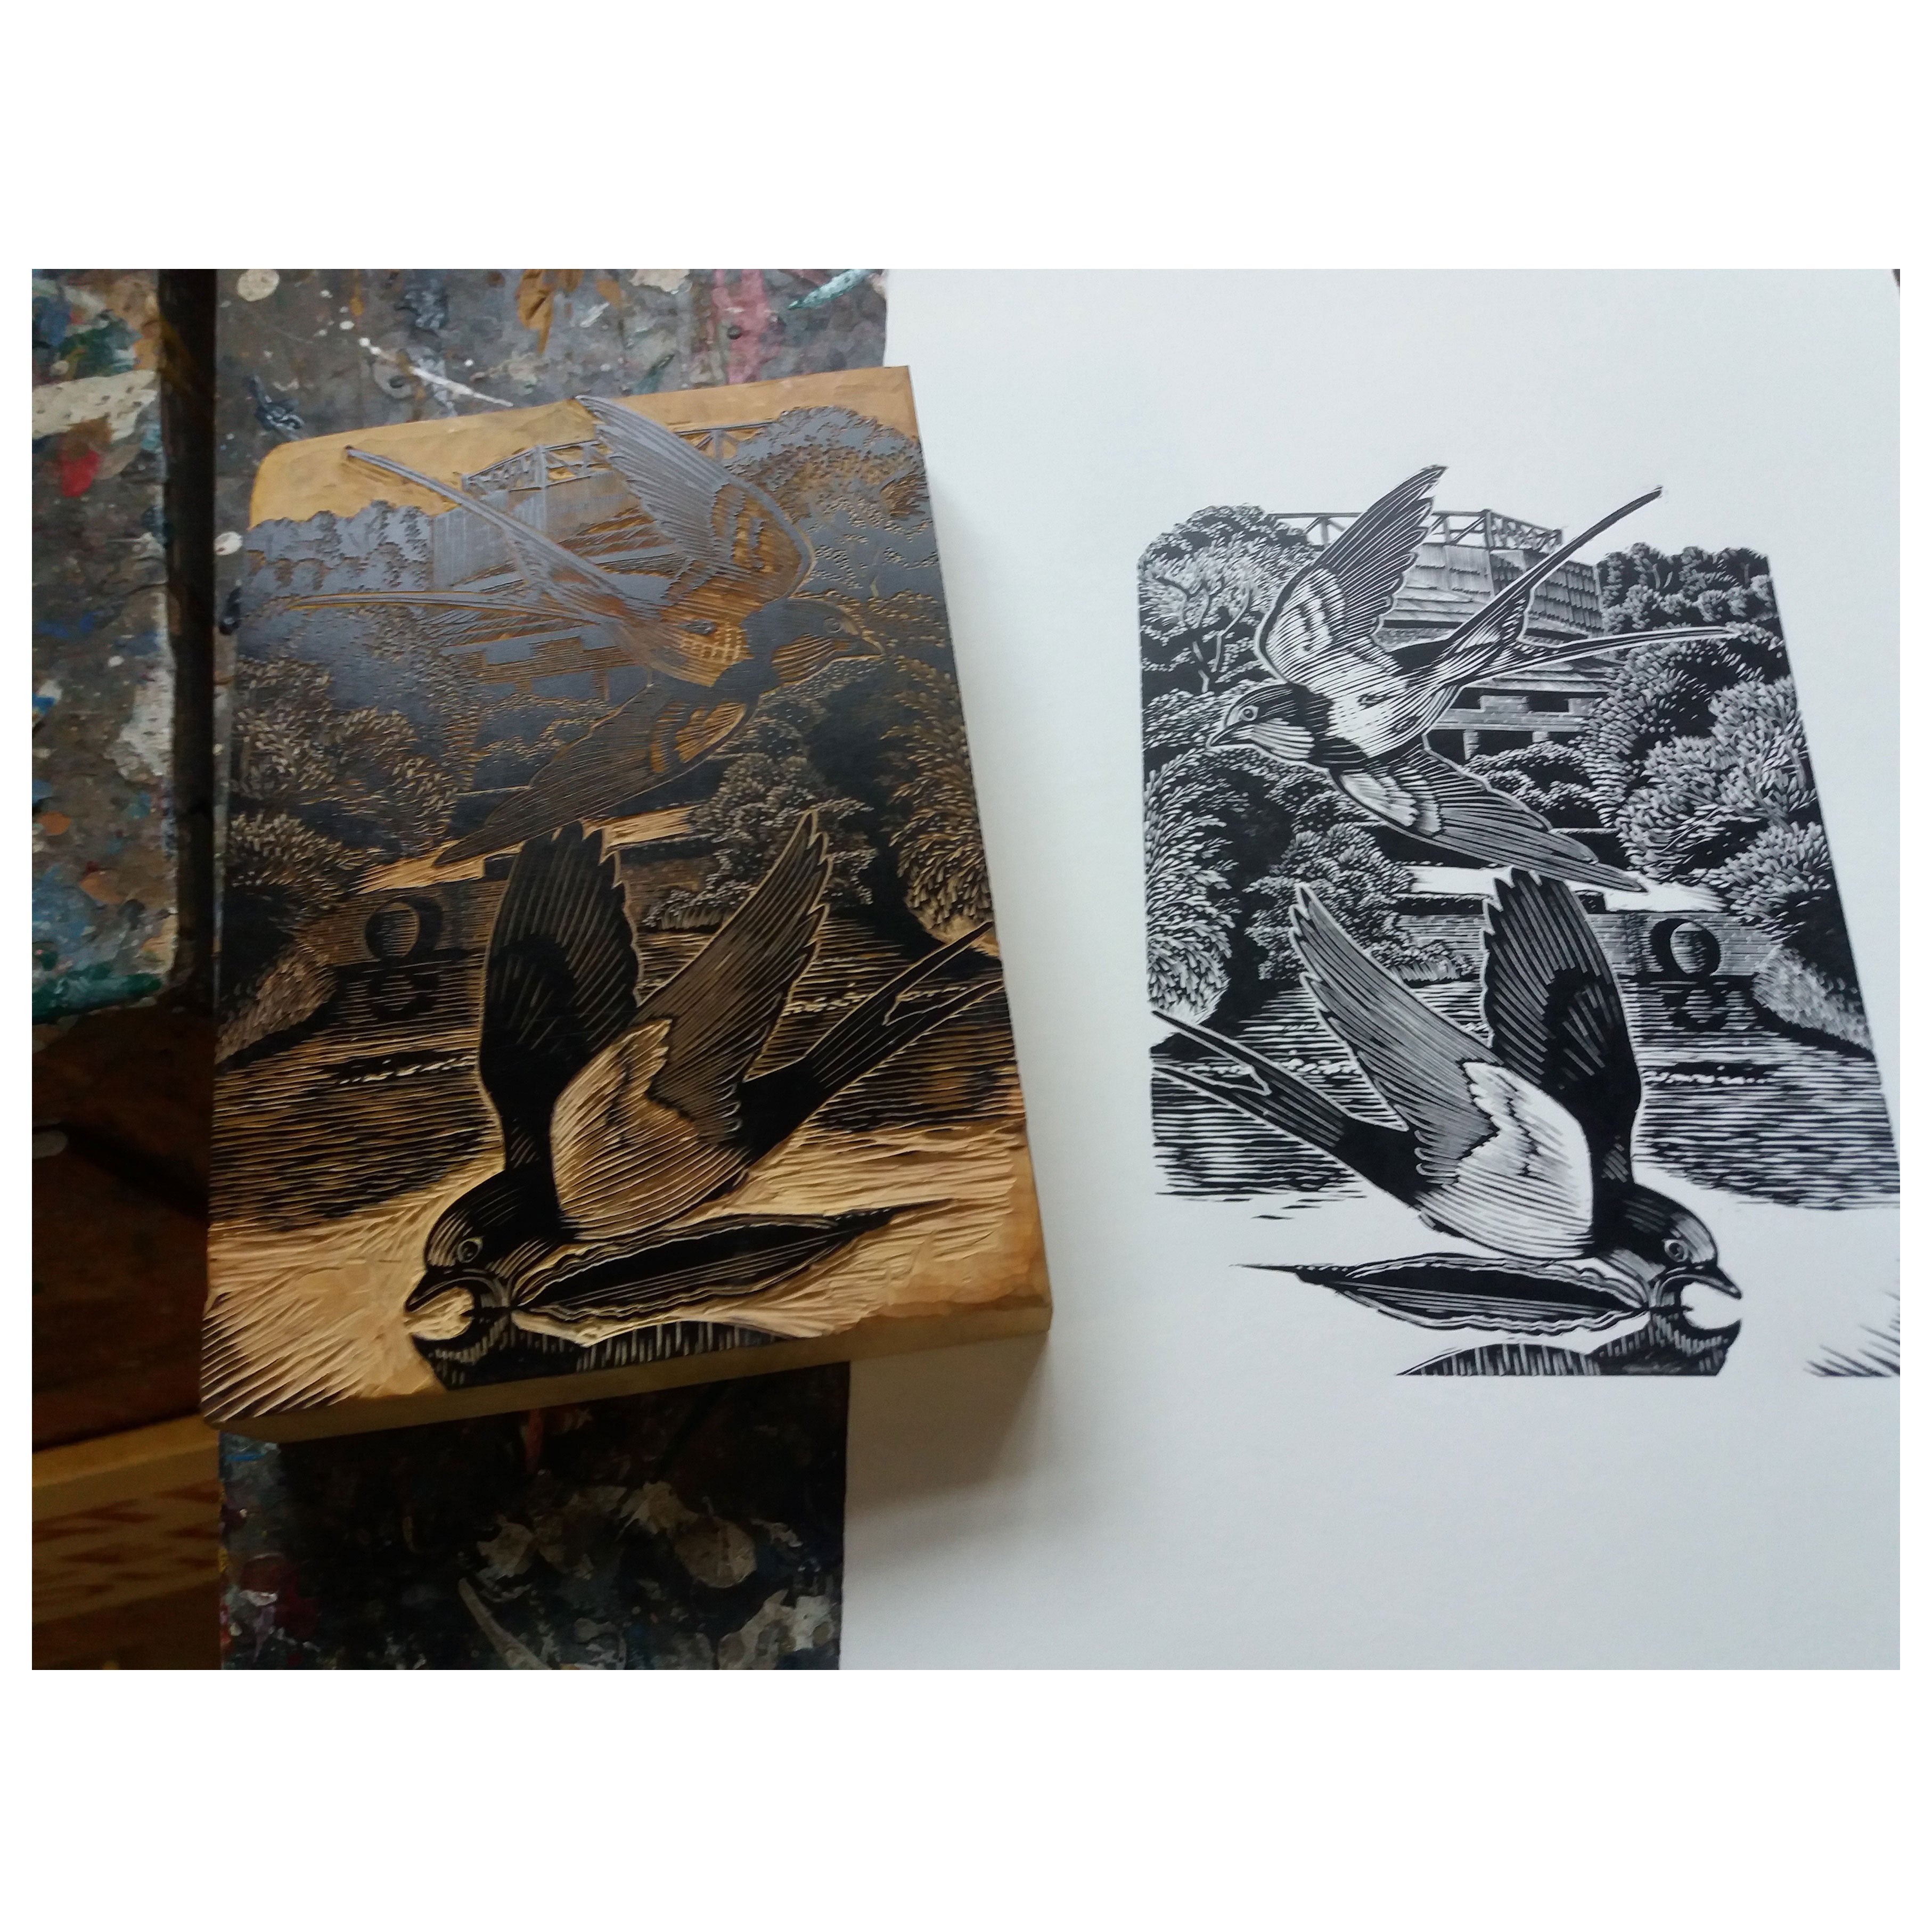 'On The Wings' Limited Edition Framed Wood Engraved Print by Keith A Pettit Glyndebourne Shop